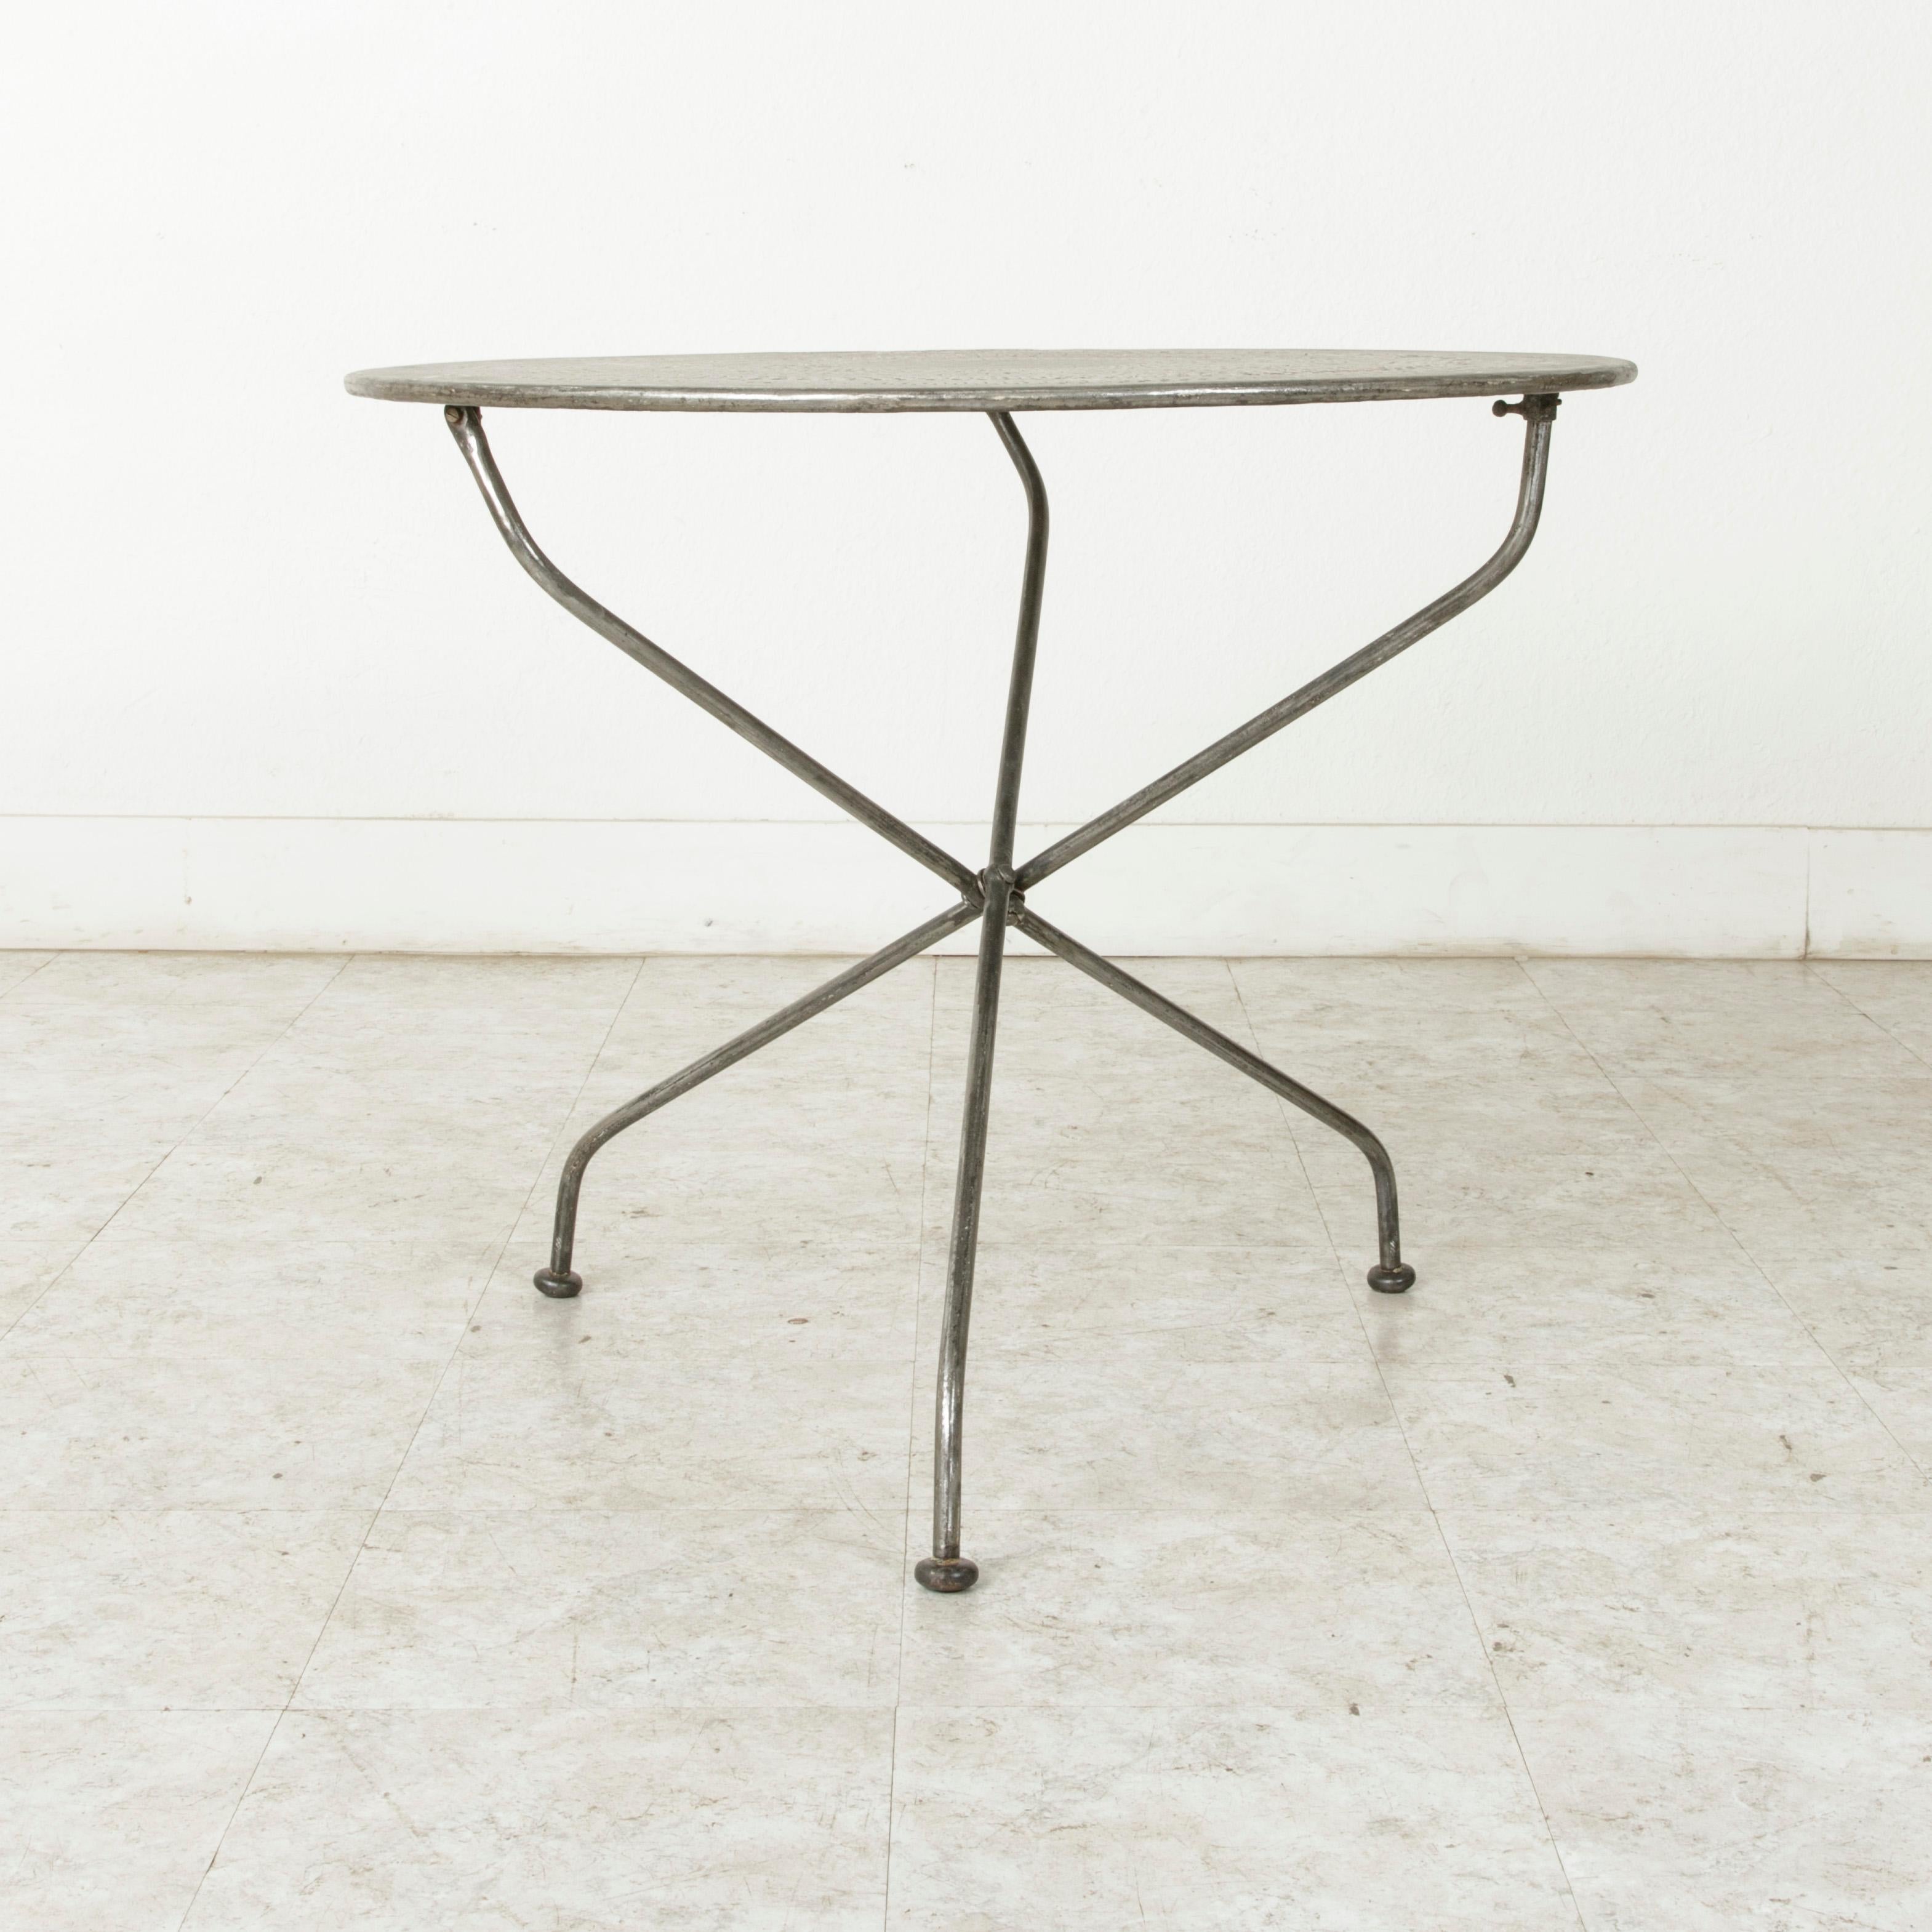 Mid-20th Century French Folding Pierced Metal Outdoor Garden Table, Cafe Table 2